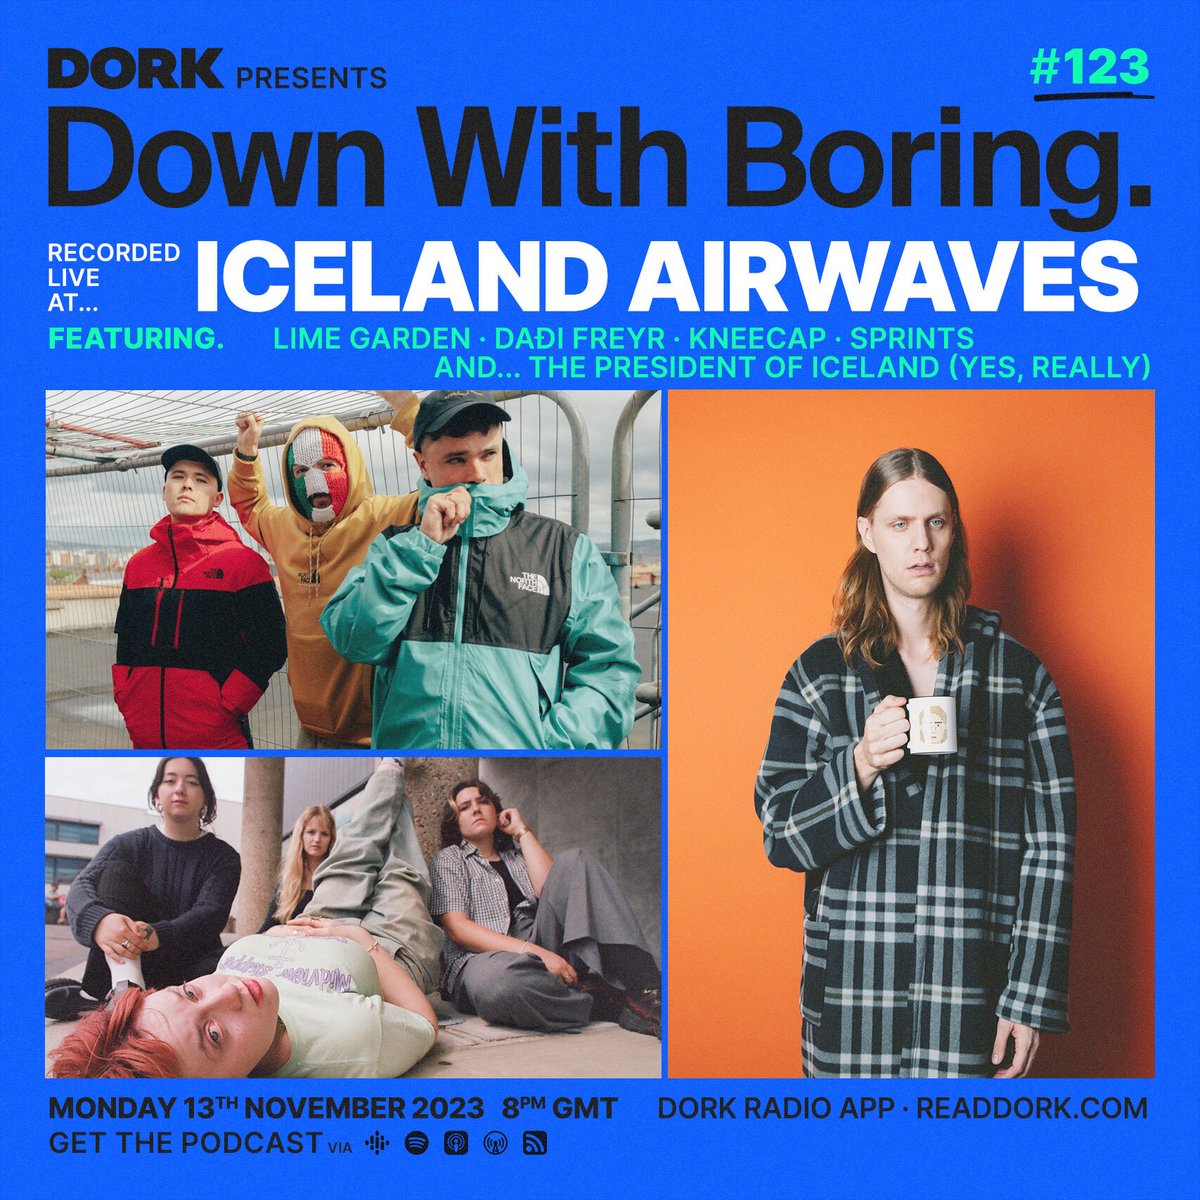 This week’s Down With Boring podcast was recorded at Iceland Airwaves! Featuring interviews with Daði Freyr, Kneecap, Sprints, Lime Garden, and the prez himself. Debuts exclusively tonight on Dork Radio at 8pm - @readdork Then available in all your usual podcast homes 🎵